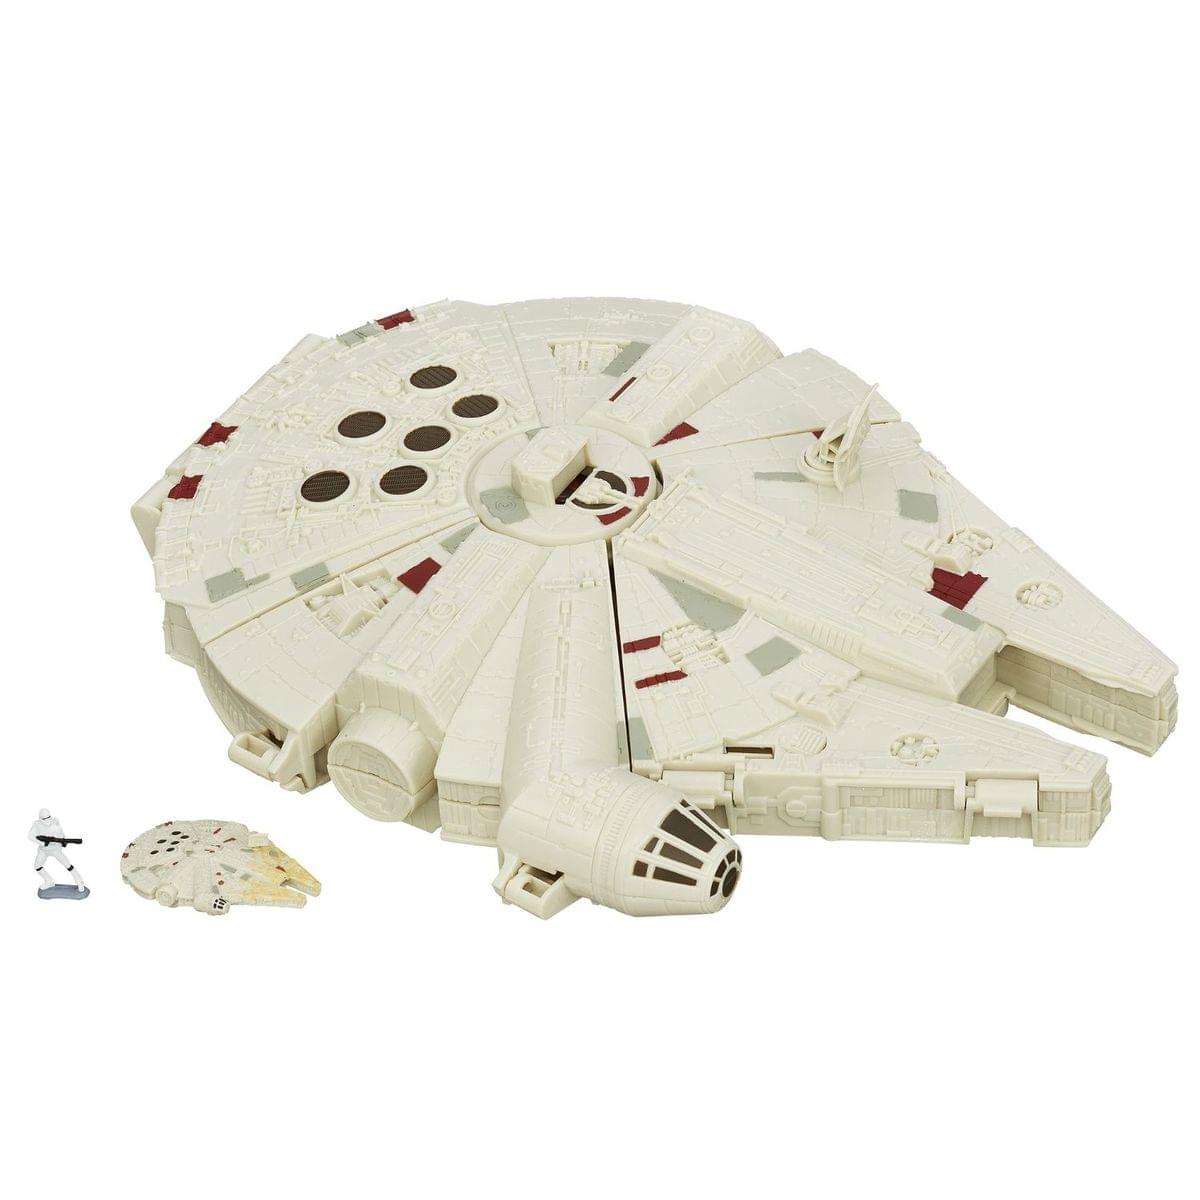 Star Wars The Force Awakens Micro Machines Millennium Falcon Playset - image 1 of 4